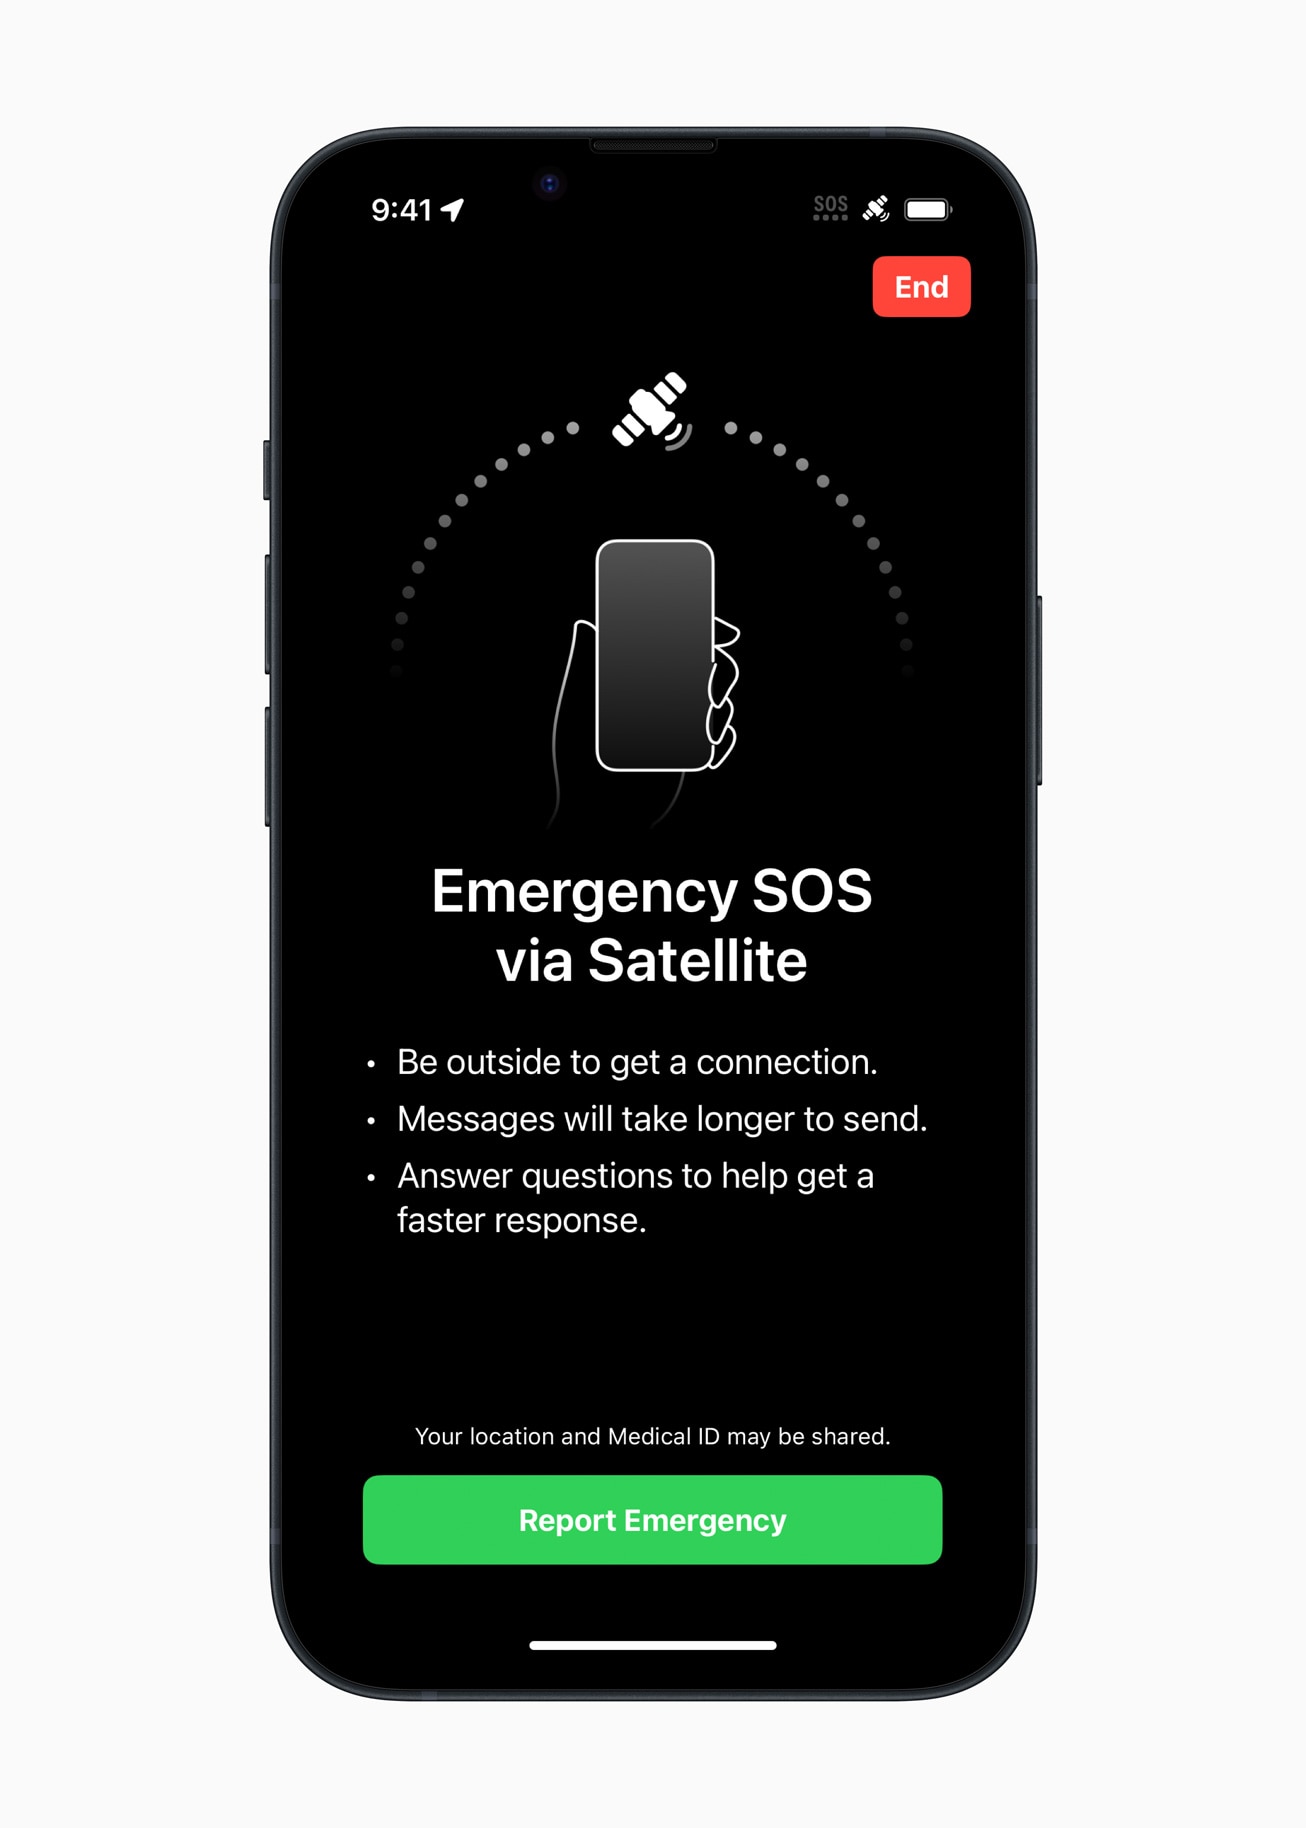 An image of an Apple iPhone displaying an emergency SOS phone call advising the caller to be outside 